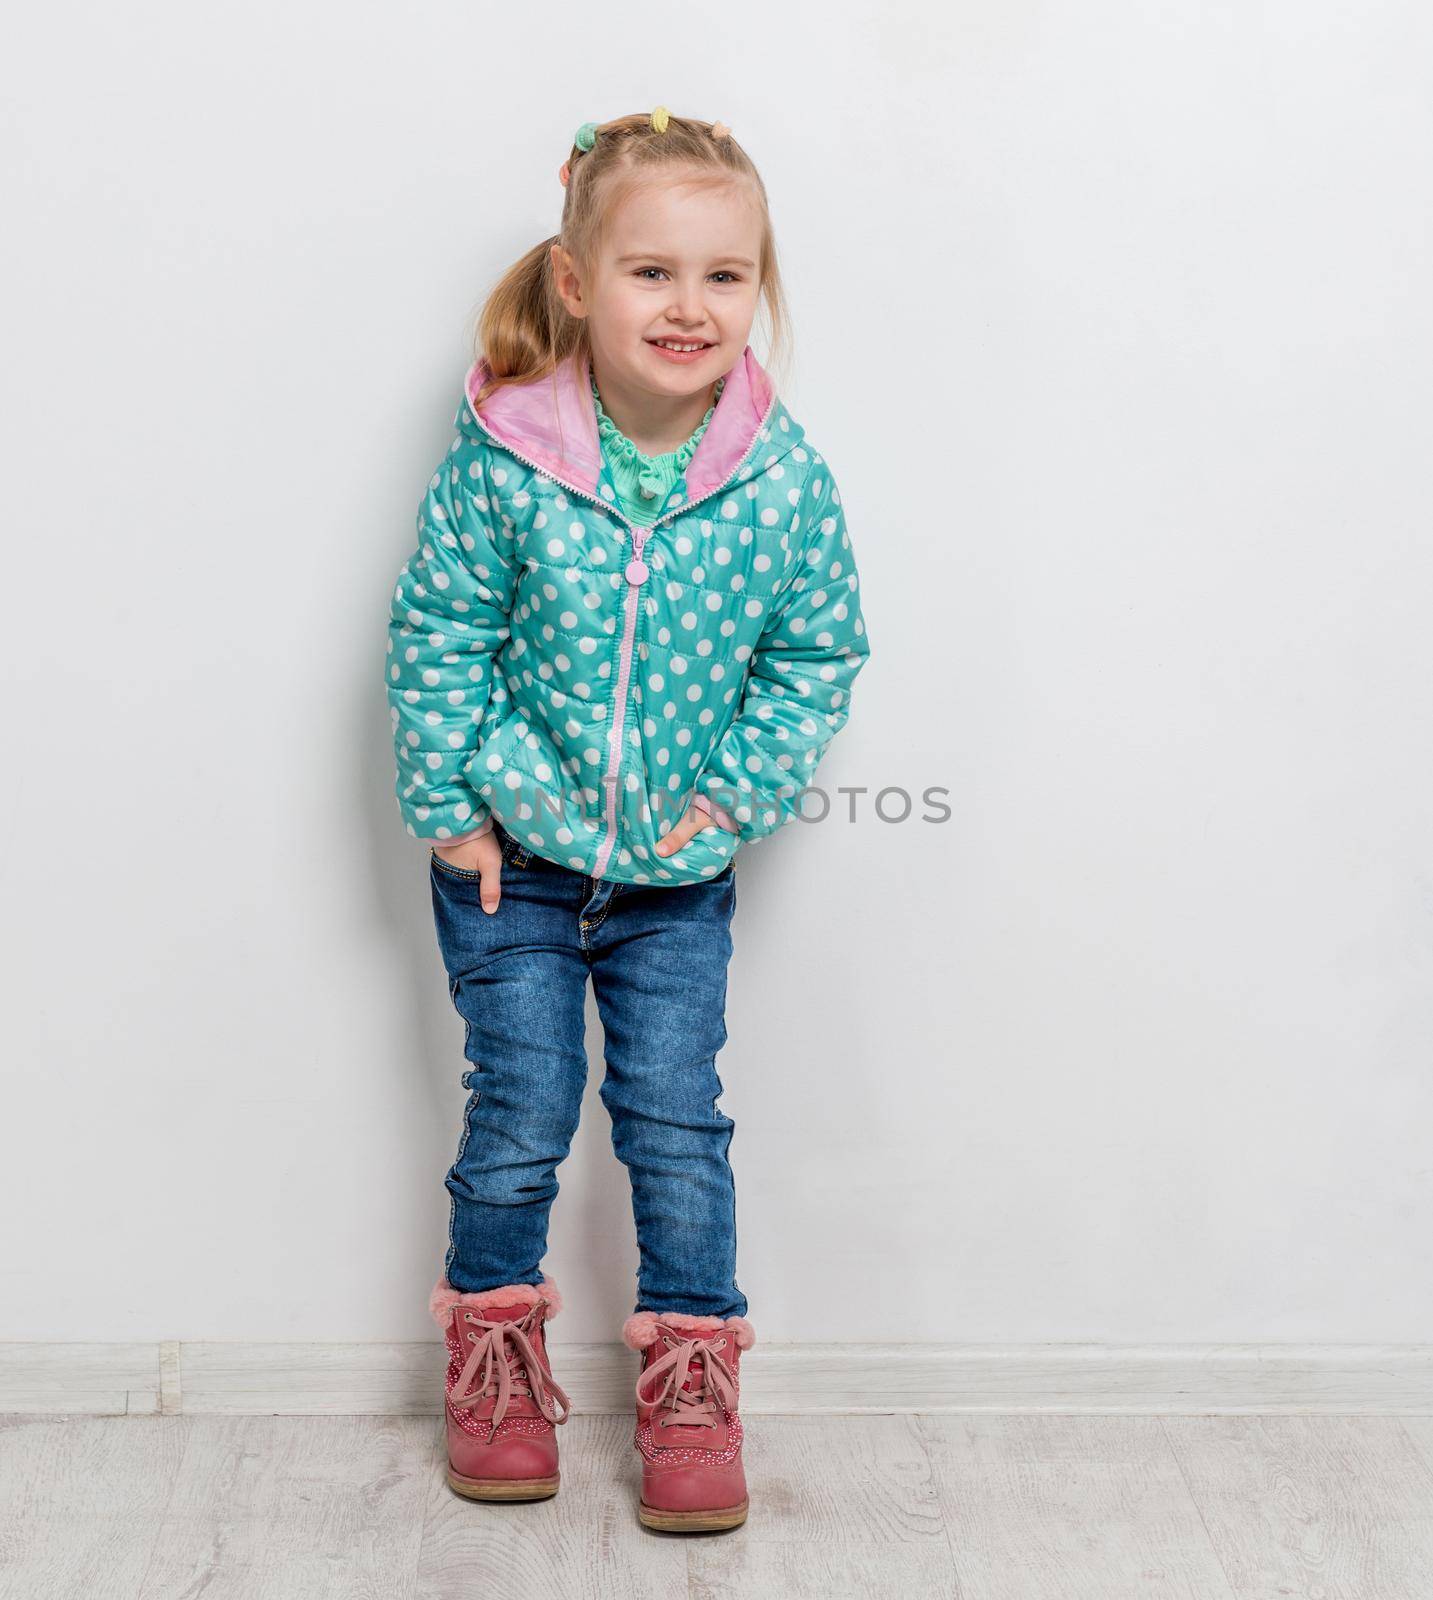 trendy little girl in jeans, jacket and boots by tan4ikk1